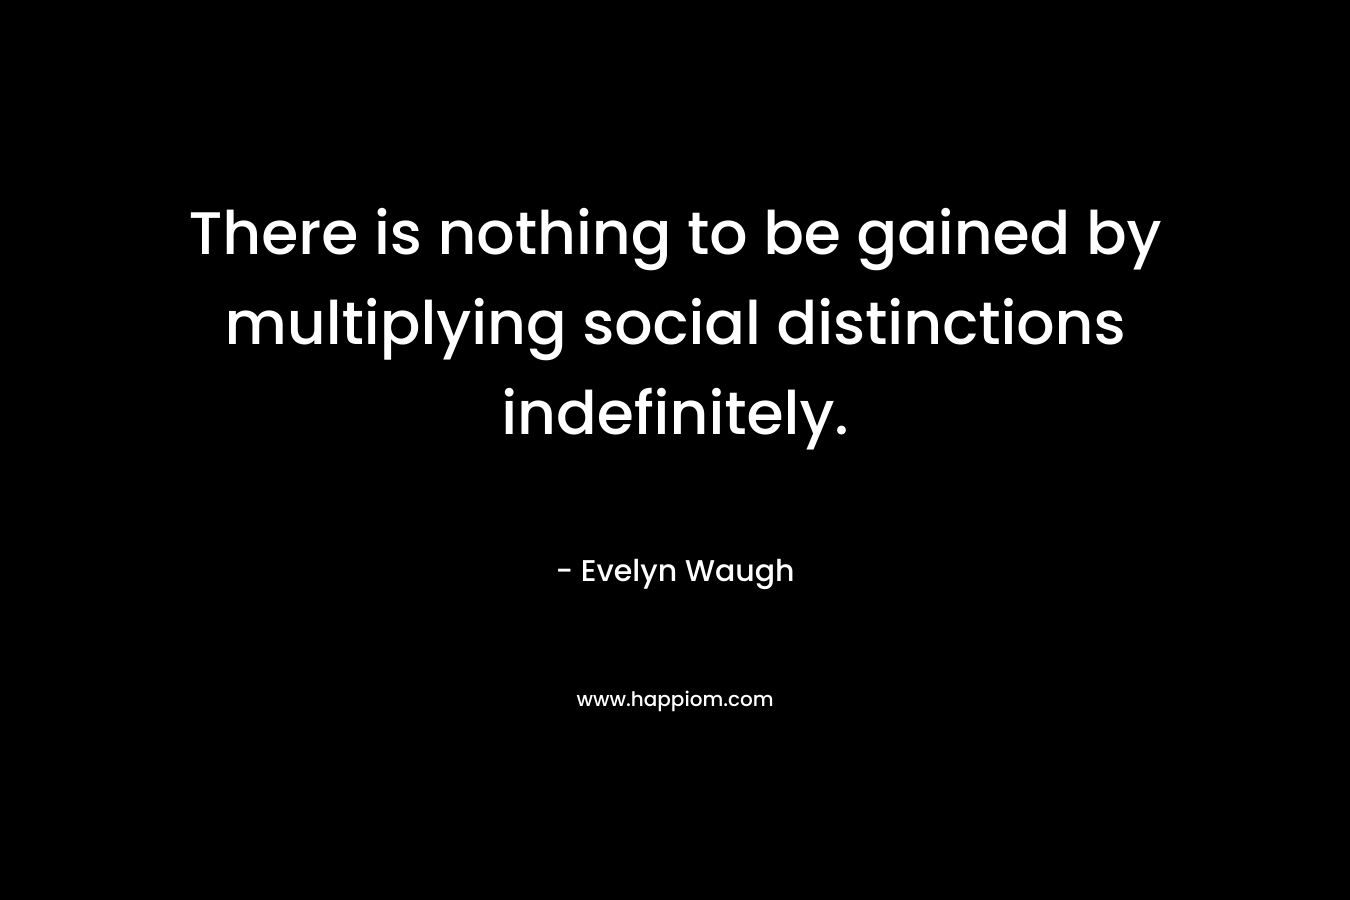 There is nothing to be gained by multiplying social distinctions indefinitely. – Evelyn Waugh